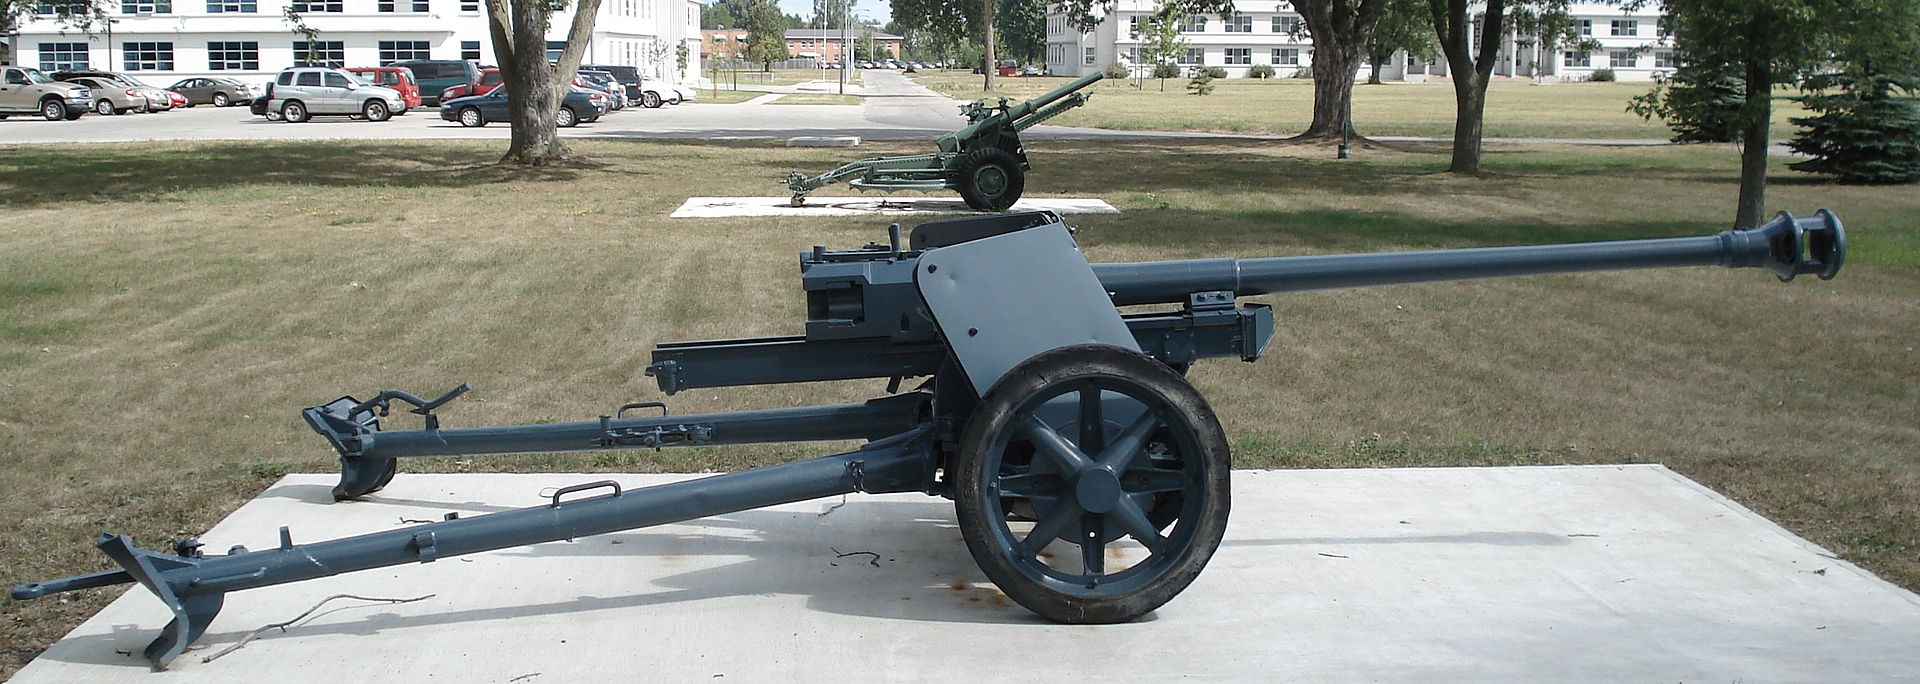 photo of 7.5cm Pak 40 L/46 from Wikipedia